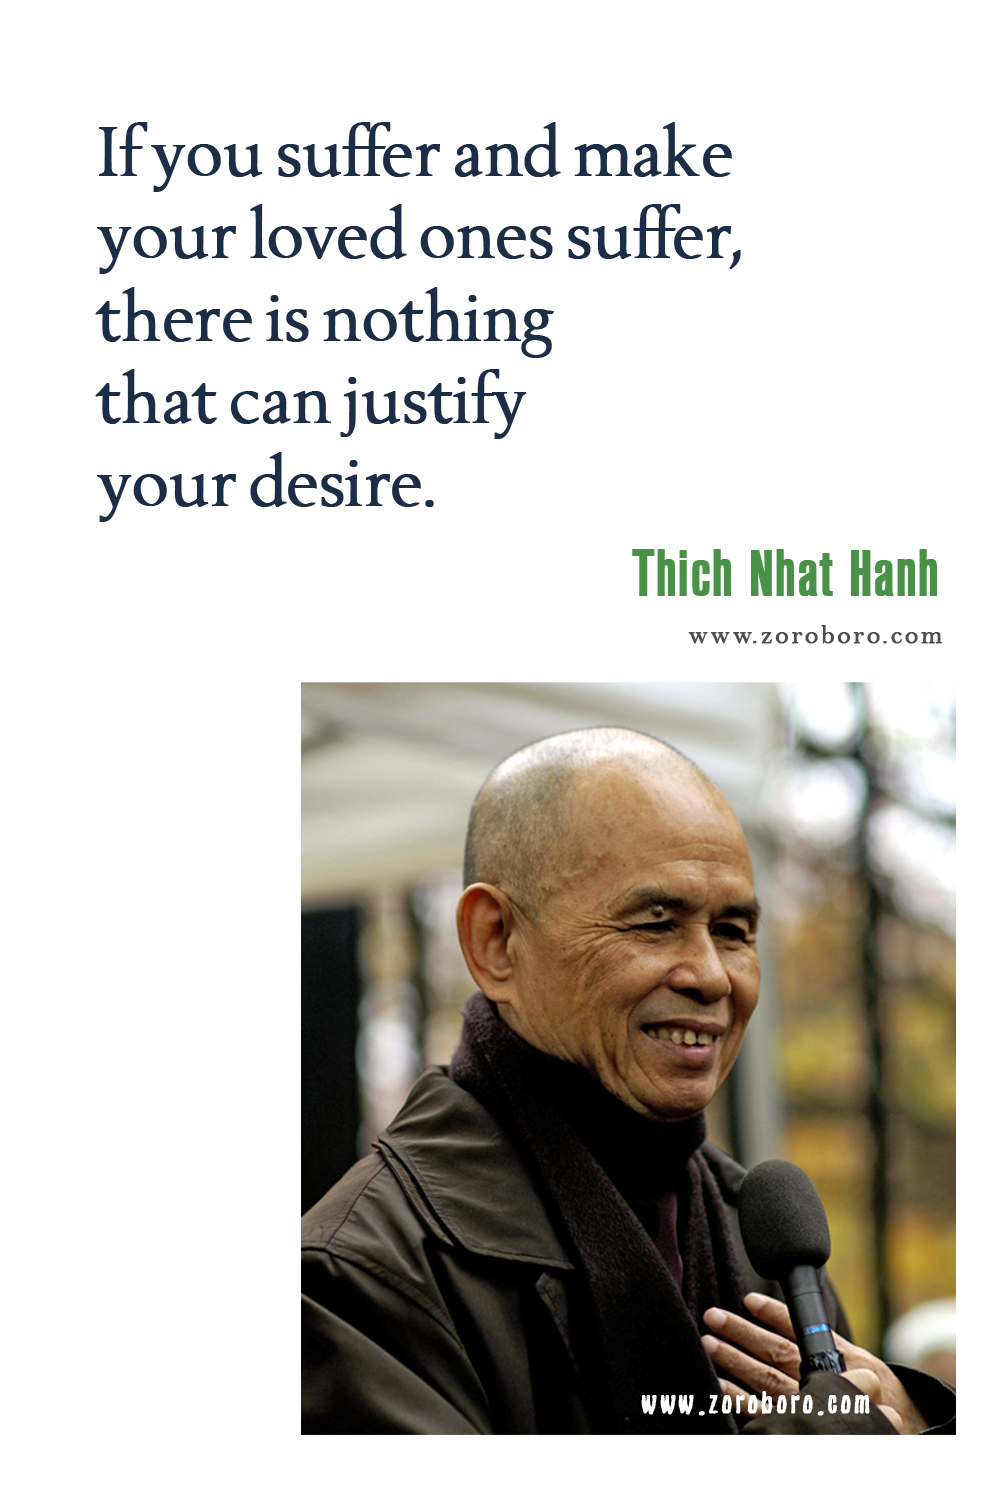 Thich Nhat Hanh Quotes, Thich Nhat Hanh Teaching, Thich Nhat Hanh Mind, Peace, Love & Empathy Quotes, Thich Nhat Hanh Books Quotes, Spiritual Quotes, Thich Nhat Hanh Inspirational Quotes